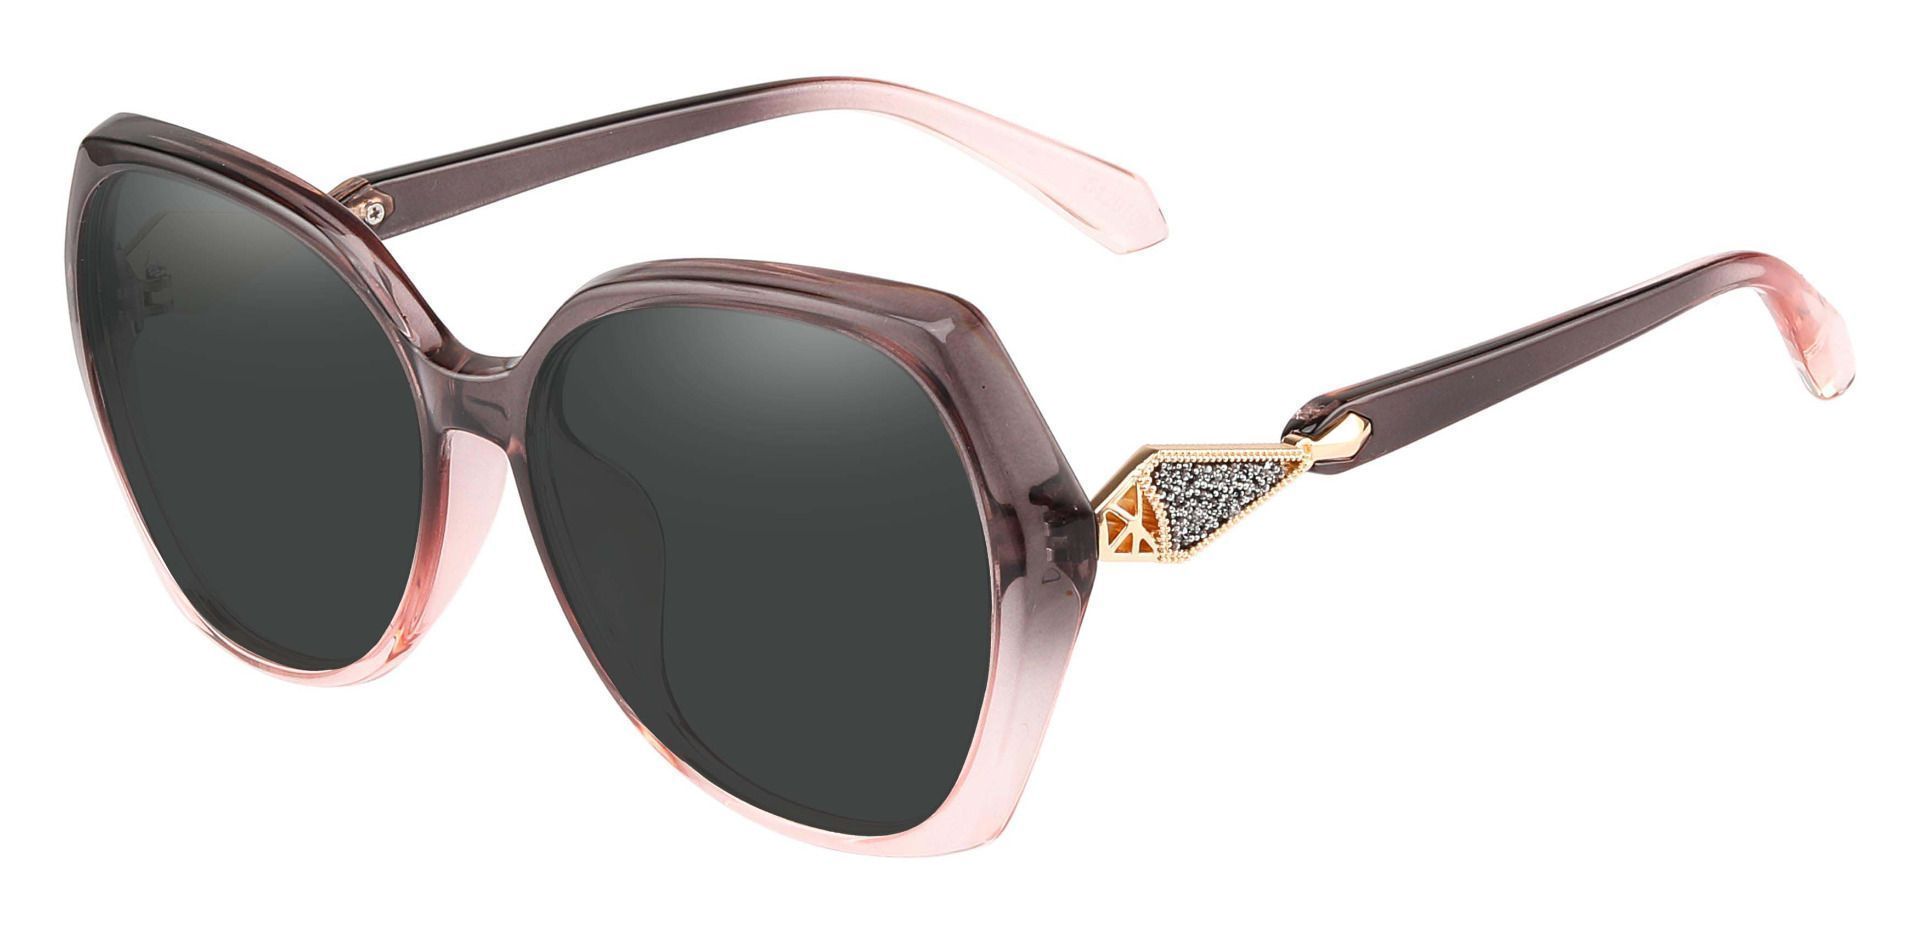 Solitaire Geometric Reading Sunglasses - Pink Frame With Gray Lenses